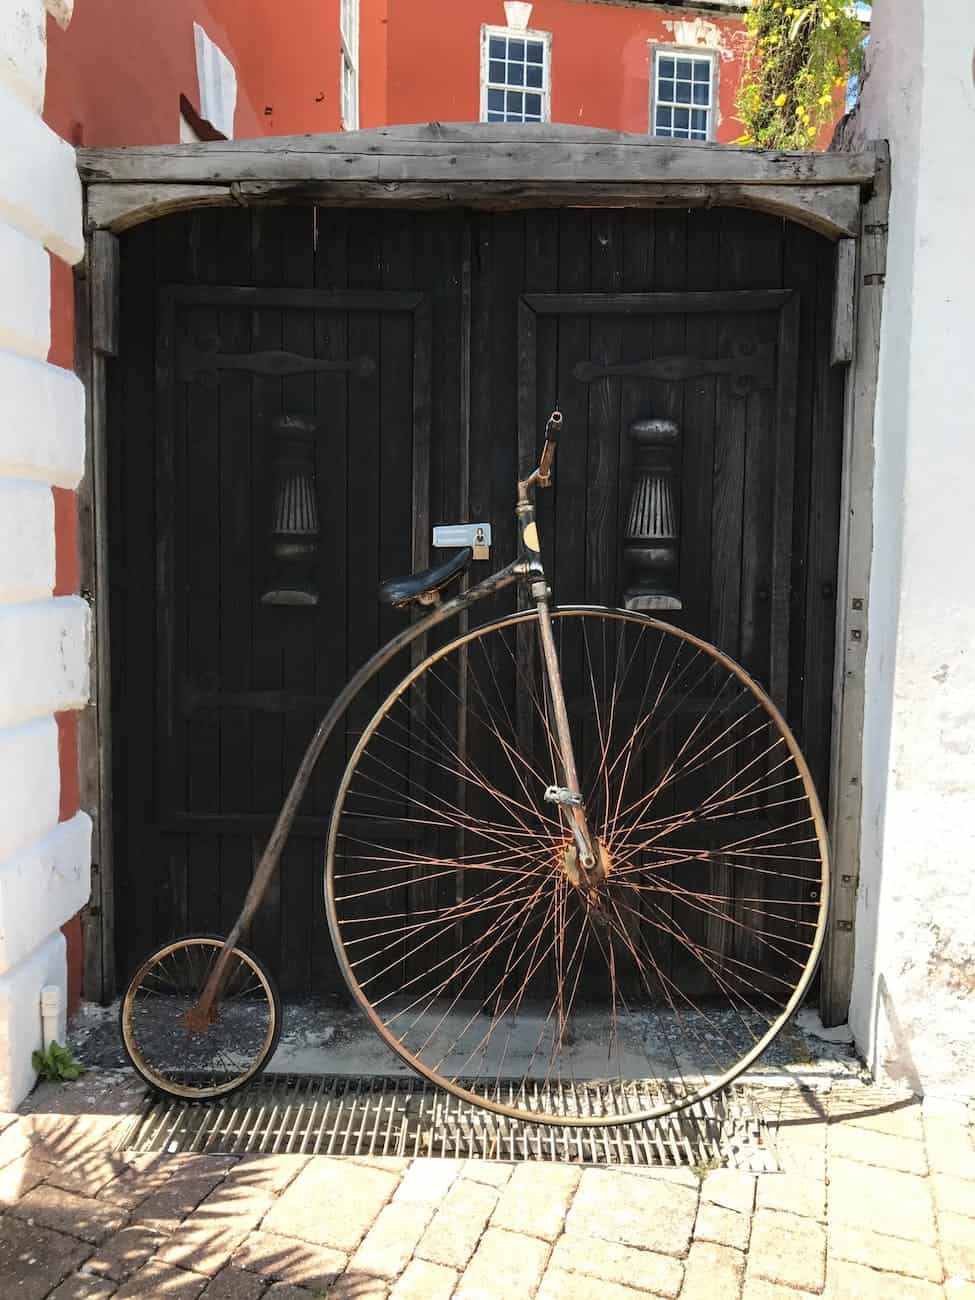 Who Invented the Penny Farthing Bicycle?